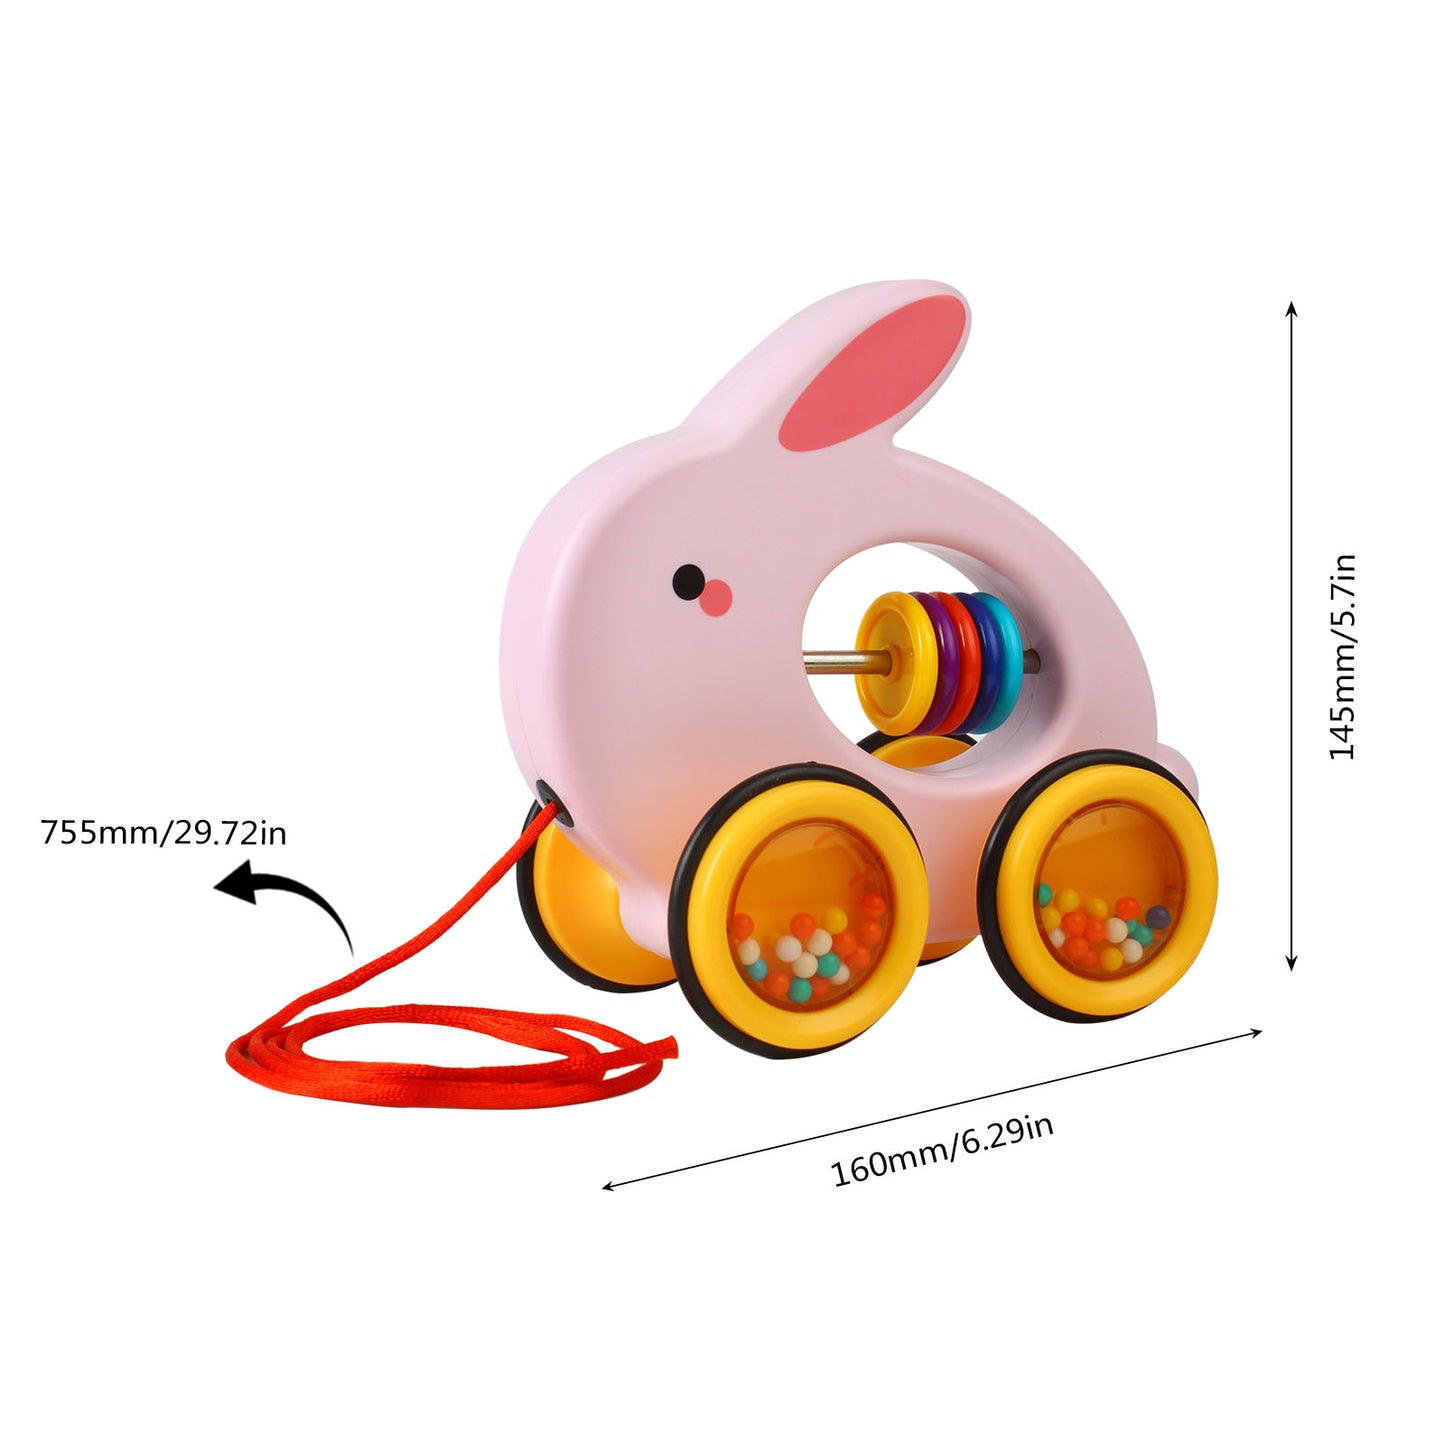 NOOLY Toddler Pull Toys, Pull Along Walking Toy 1 2 3 Years Old TLWJC-01 (Cute Rabbit)